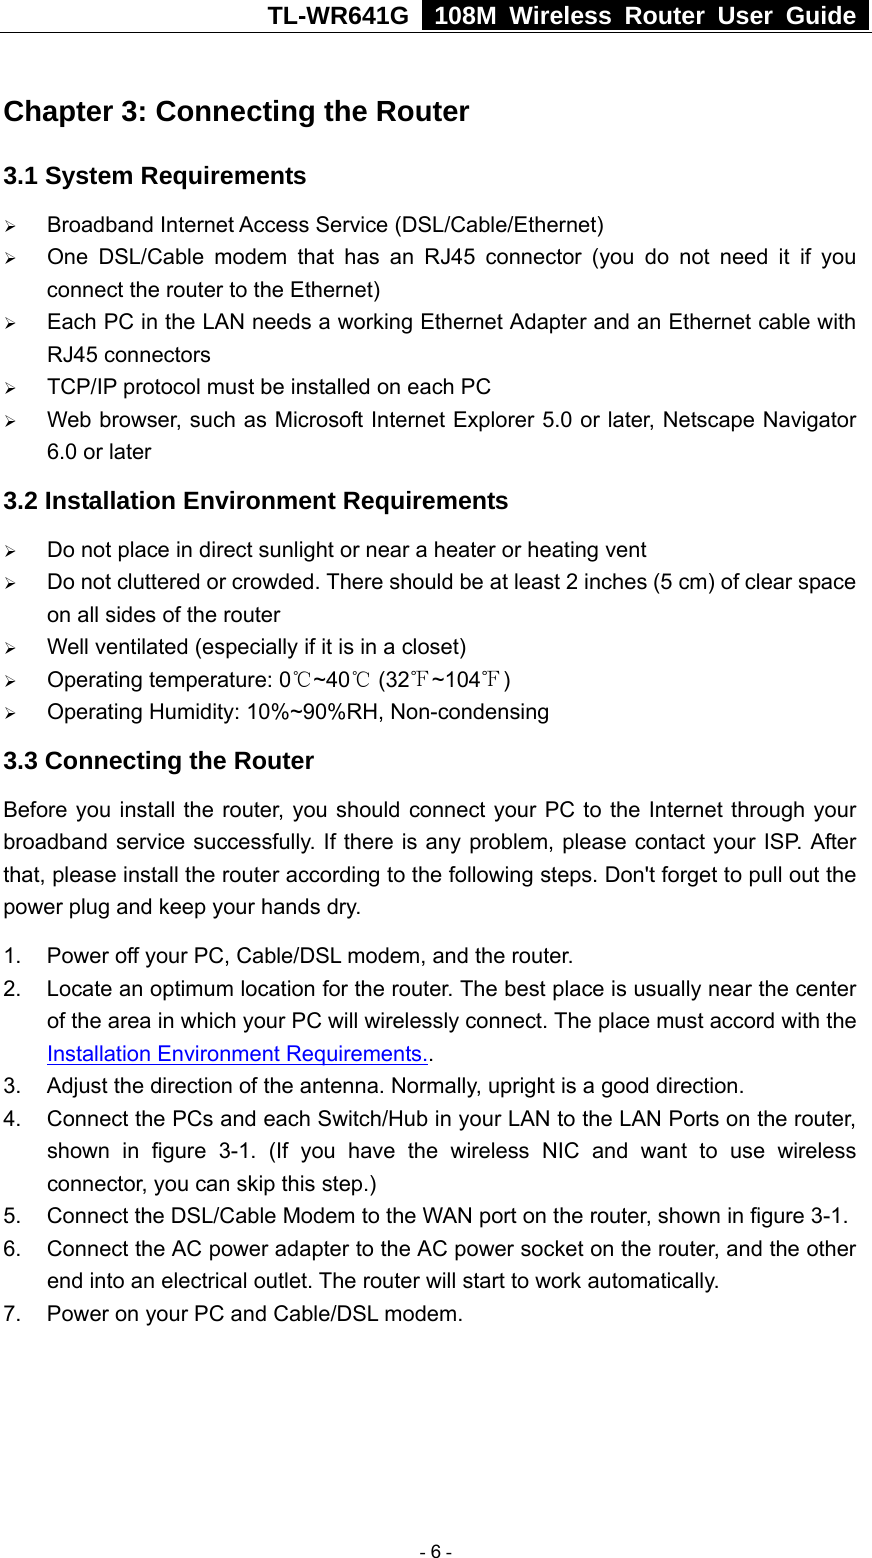 TL-WR641G   108M Wireless Router User Guide  Chapter 3: Connecting the Router 3.1 System Requirements ¾ Broadband Internet Access Service (DSL/Cable/Ethernet) ¾ One DSL/Cable modem that has an RJ45 connector (you do not need it if you connect the router to the Ethernet) ¾ Each PC in the LAN needs a working Ethernet Adapter and an Ethernet cable with RJ45 connectors ¾ TCP/IP protocol must be installed on each PC ¾ Web browser, such as Microsoft Internet Explorer 5.0 or later, Netscape Navigator 6.0 or later 3.2 Installation Environment Requirements ¾ Do not place in direct sunlight or near a heater or heating vent ¾ Do not cluttered or crowded. There should be at least 2 inches (5 cm) of clear space on all sides of the router ¾ Well ventilated (especially if it is in a closet) ¾ Operating temperature: 0 ~40  (32 ~104 )℃℃℉ ℉ ¾ Operating Humidity: 10%~90%RH, Non-condensing 3.3 Connecting the Router Before you install the router, you should connect your PC to the Internet through your broadband service successfully. If there is any problem, please contact your ISP. After that, please install the router according to the following steps. Don&apos;t forget to pull out the power plug and keep your hands dry. 1.  Power off your PC, Cable/DSL modem, and the router. 2.  Locate an optimum location for the router. The best place is usually near the center of the area in which your PC will wirelessly connect. The place must accord with the Installation Environment Requirements.. 3.  Adjust the direction of the antenna. Normally, upright is a good direction. 4.  Connect the PCs and each Switch/Hub in your LAN to the LAN Ports on the router, shown in figure 3-1. (If you have the wireless NIC and want to use wireless connector, you can skip this step.) 5. Connect the DSL/Cable Modem to the WAN port on the router, shown in figure 3-1. 6.  Connect the AC power adapter to the AC power socket on the router, and the other end into an electrical outlet. The router will start to work automatically. 7.  Power on your PC and Cable/DSL modem.   - 6 - 